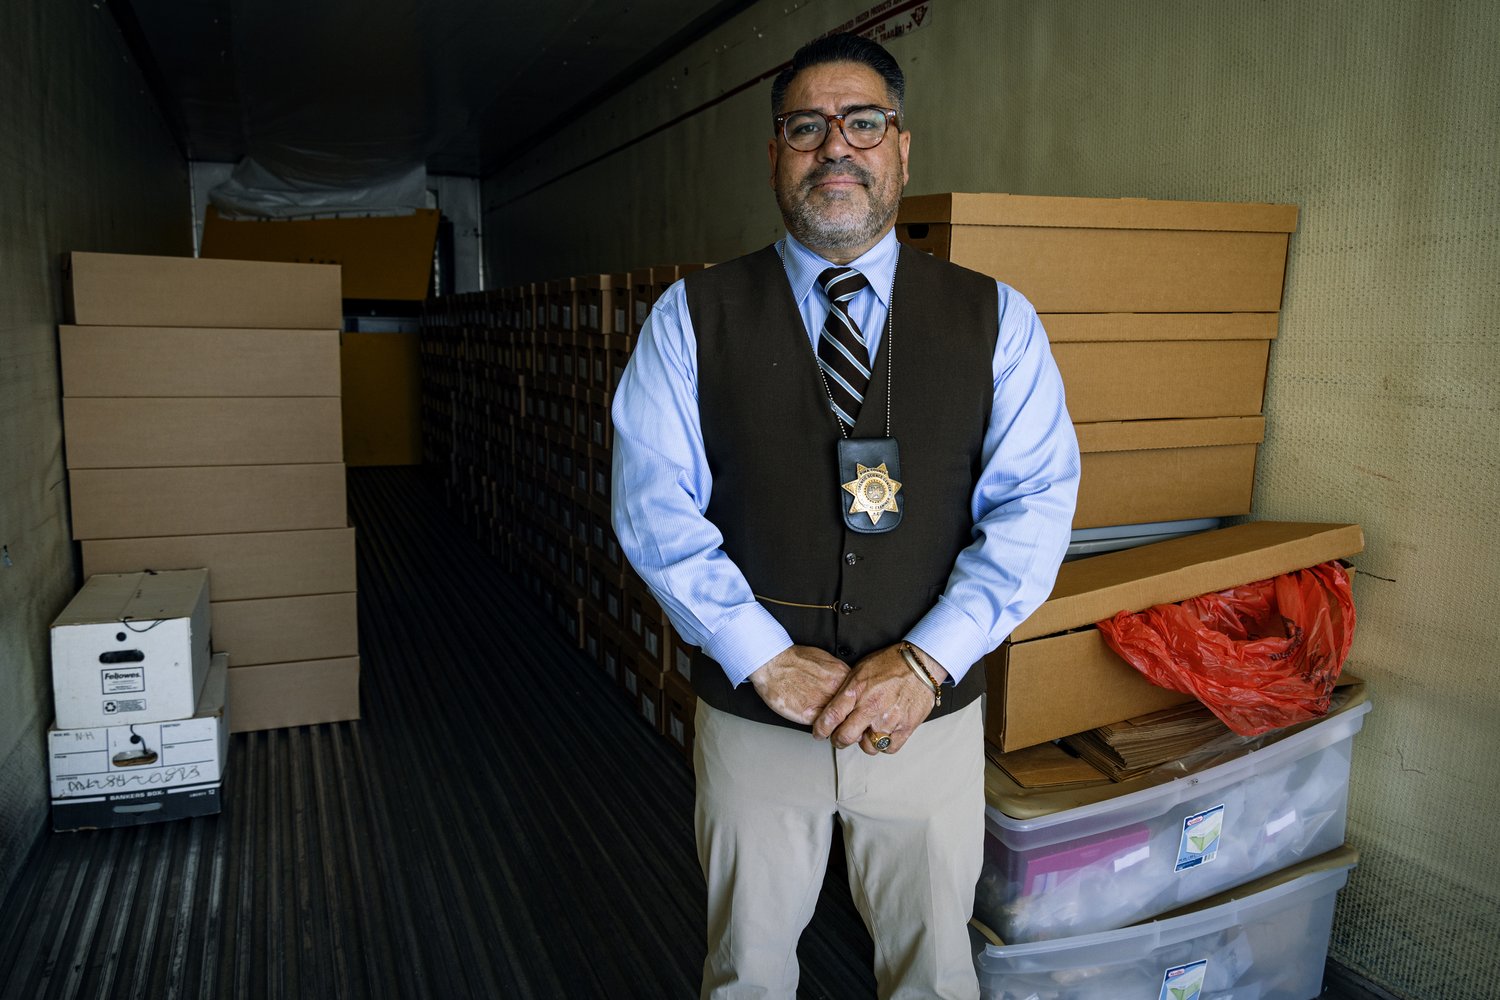 Gene Hernández, forensic examiner at the Pima County morgue, inside the trailer that holds the remains of migrants who perished along the border. © Andrea Godínez